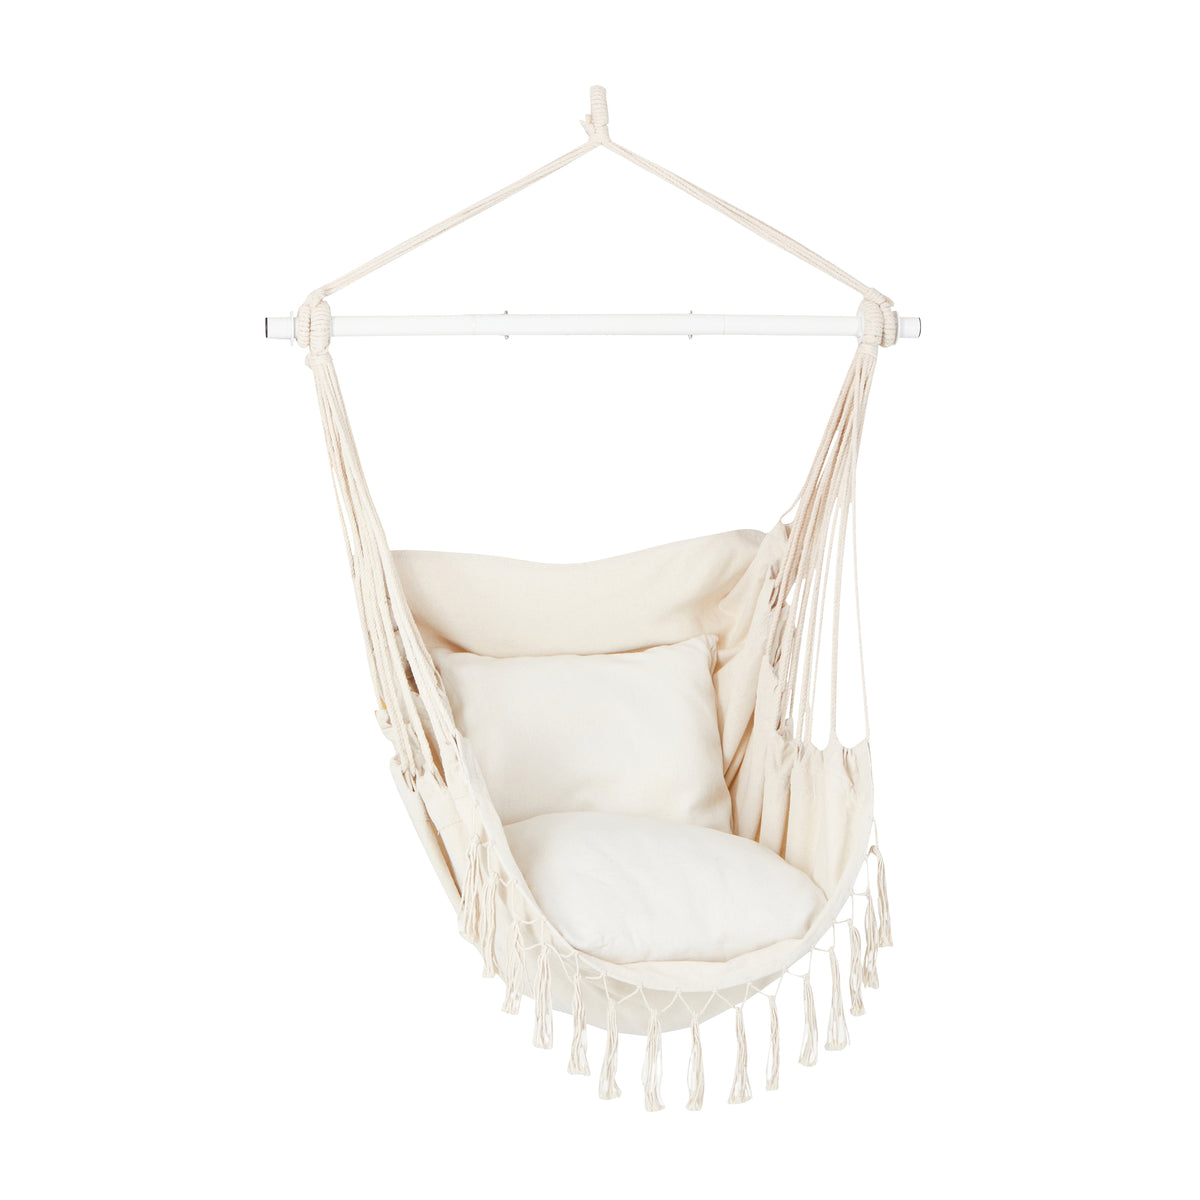 Angled view of the Bliss Hammocks 40-inch Wide Fringed Hammock Chair with 2 Matching Square Pillows, Built-In Side Pocket, and Steel Spreader Bar in the Natural variation, a solid white.